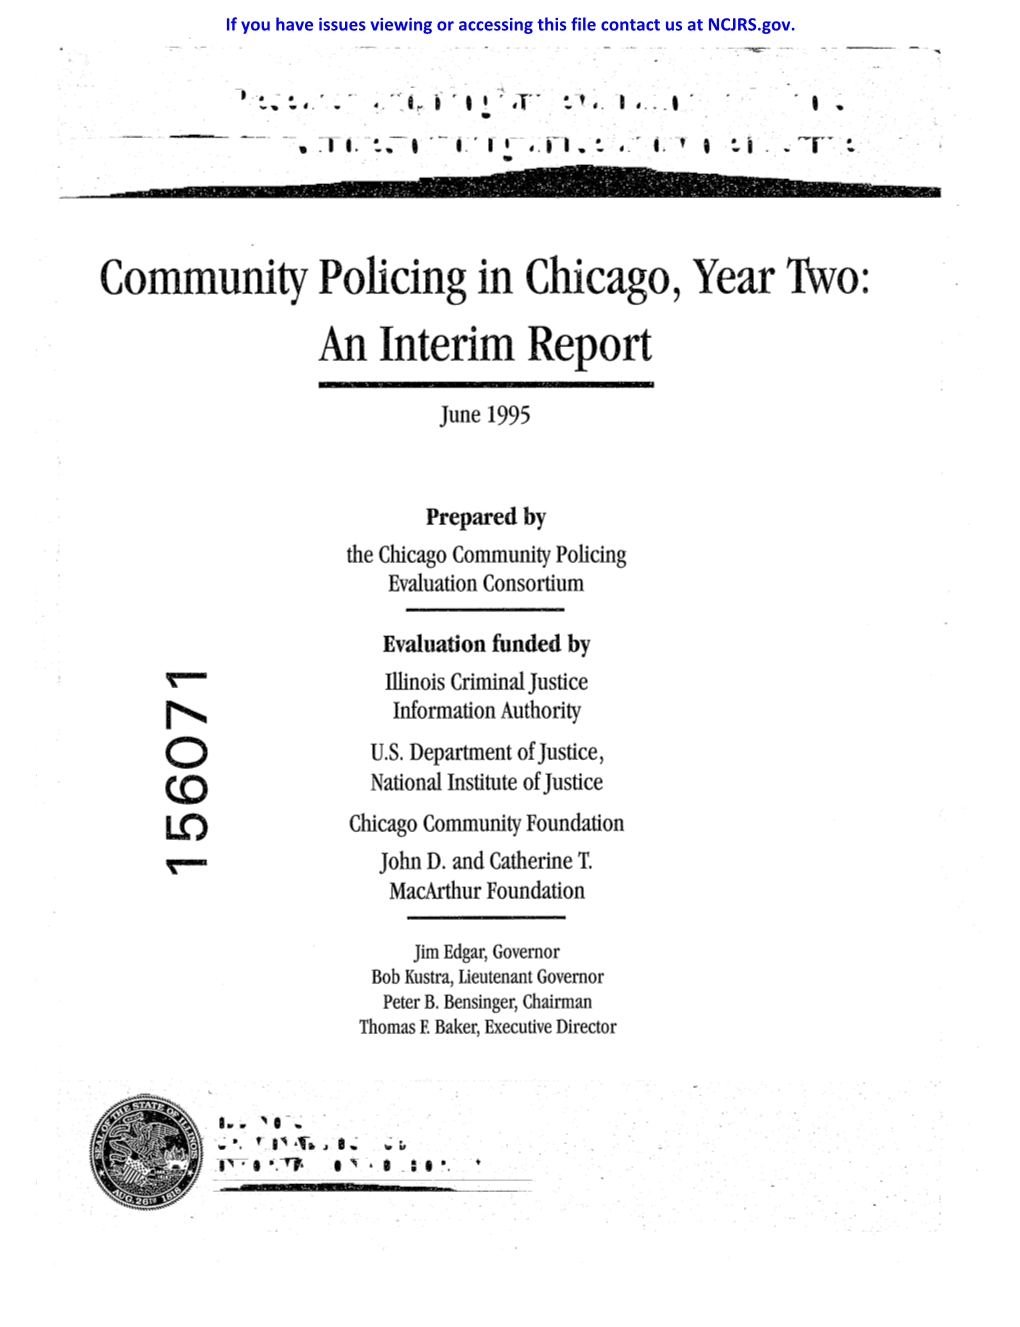 Community Policing in Chicago, Year 1\Vo: an Interim Report